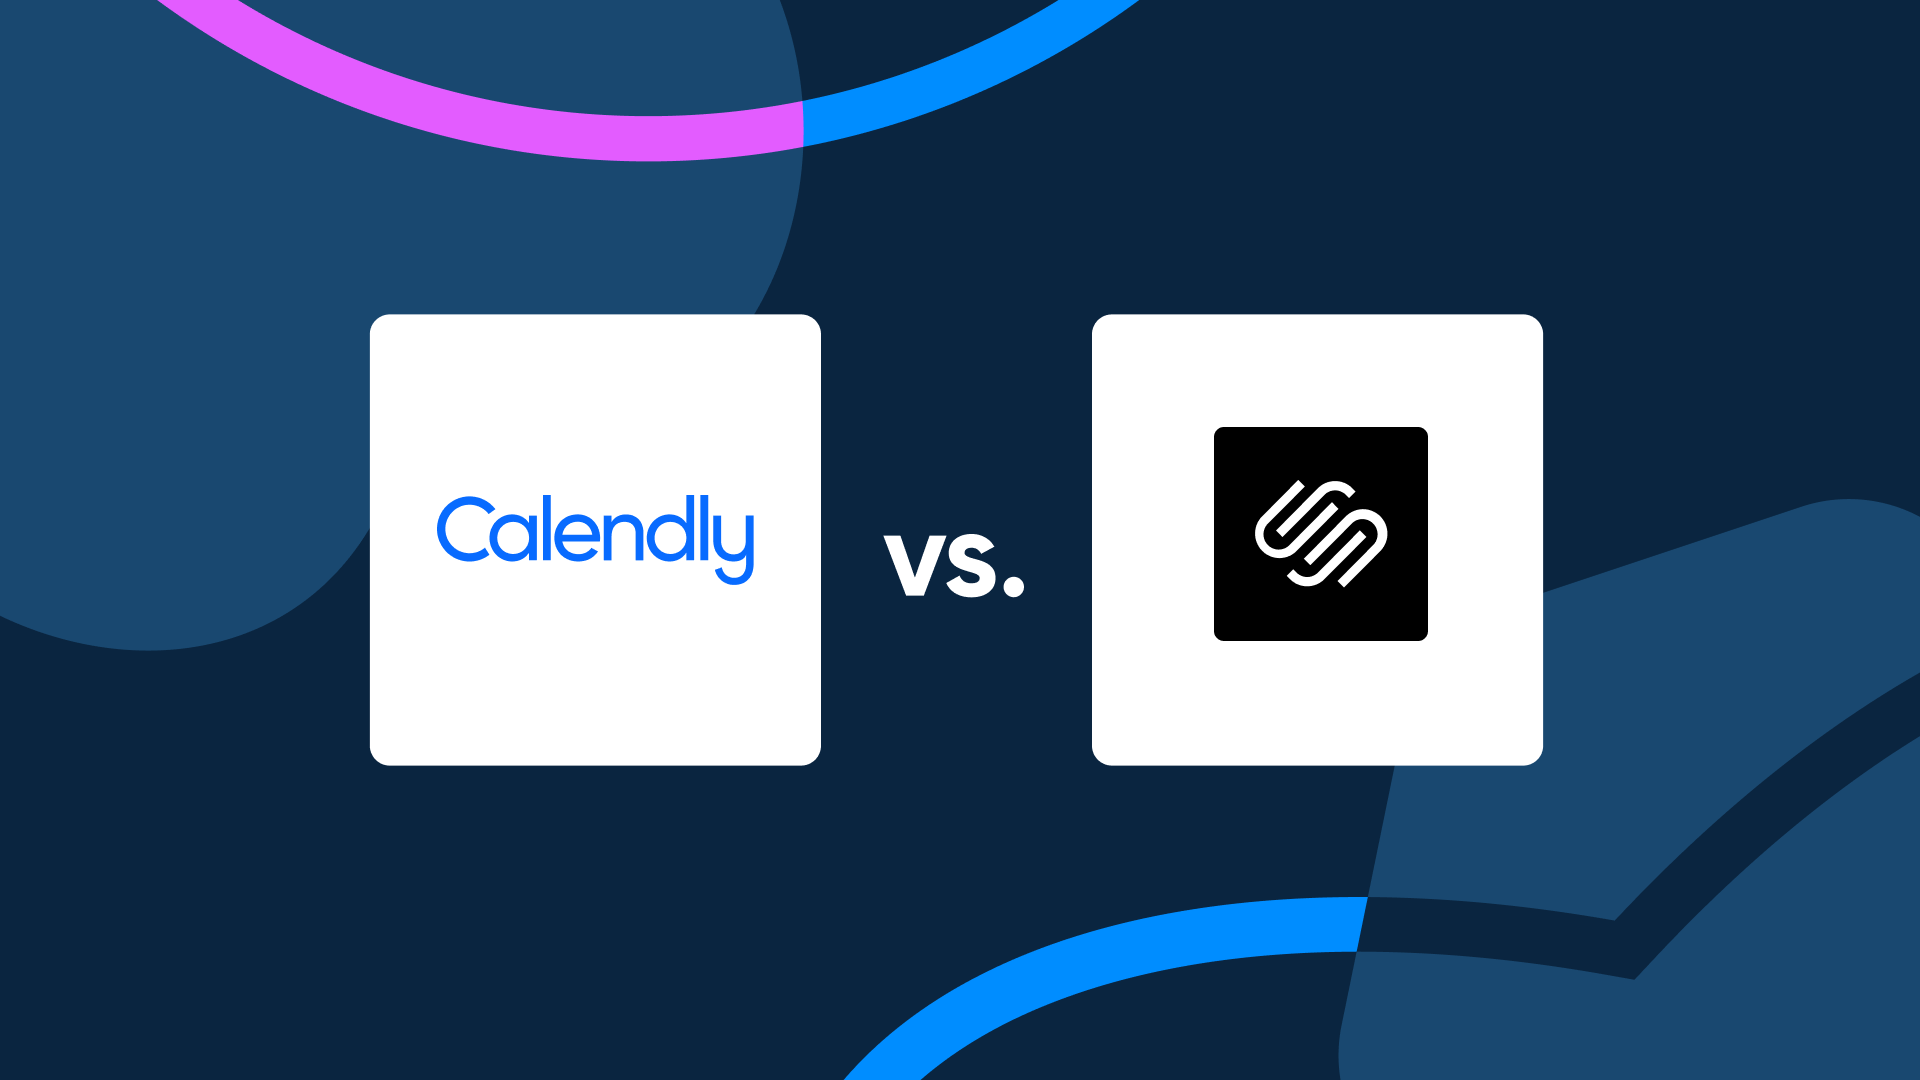 Calendly vs Acuity: Which solution is better for you? Calendly